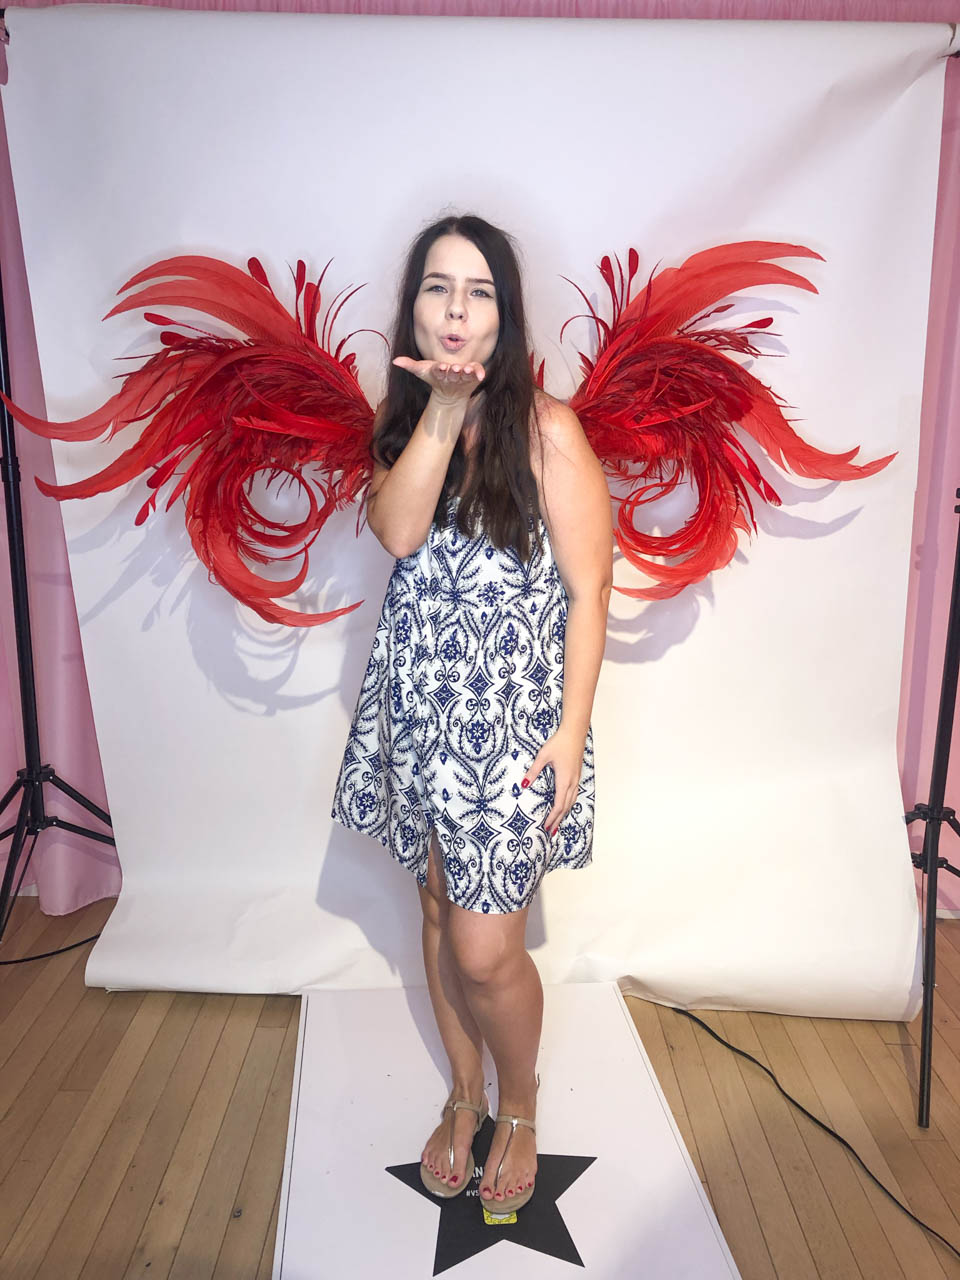 Girl in a dress posing with the Victoria's Secret angel wings and blowing a kiss towards the camera